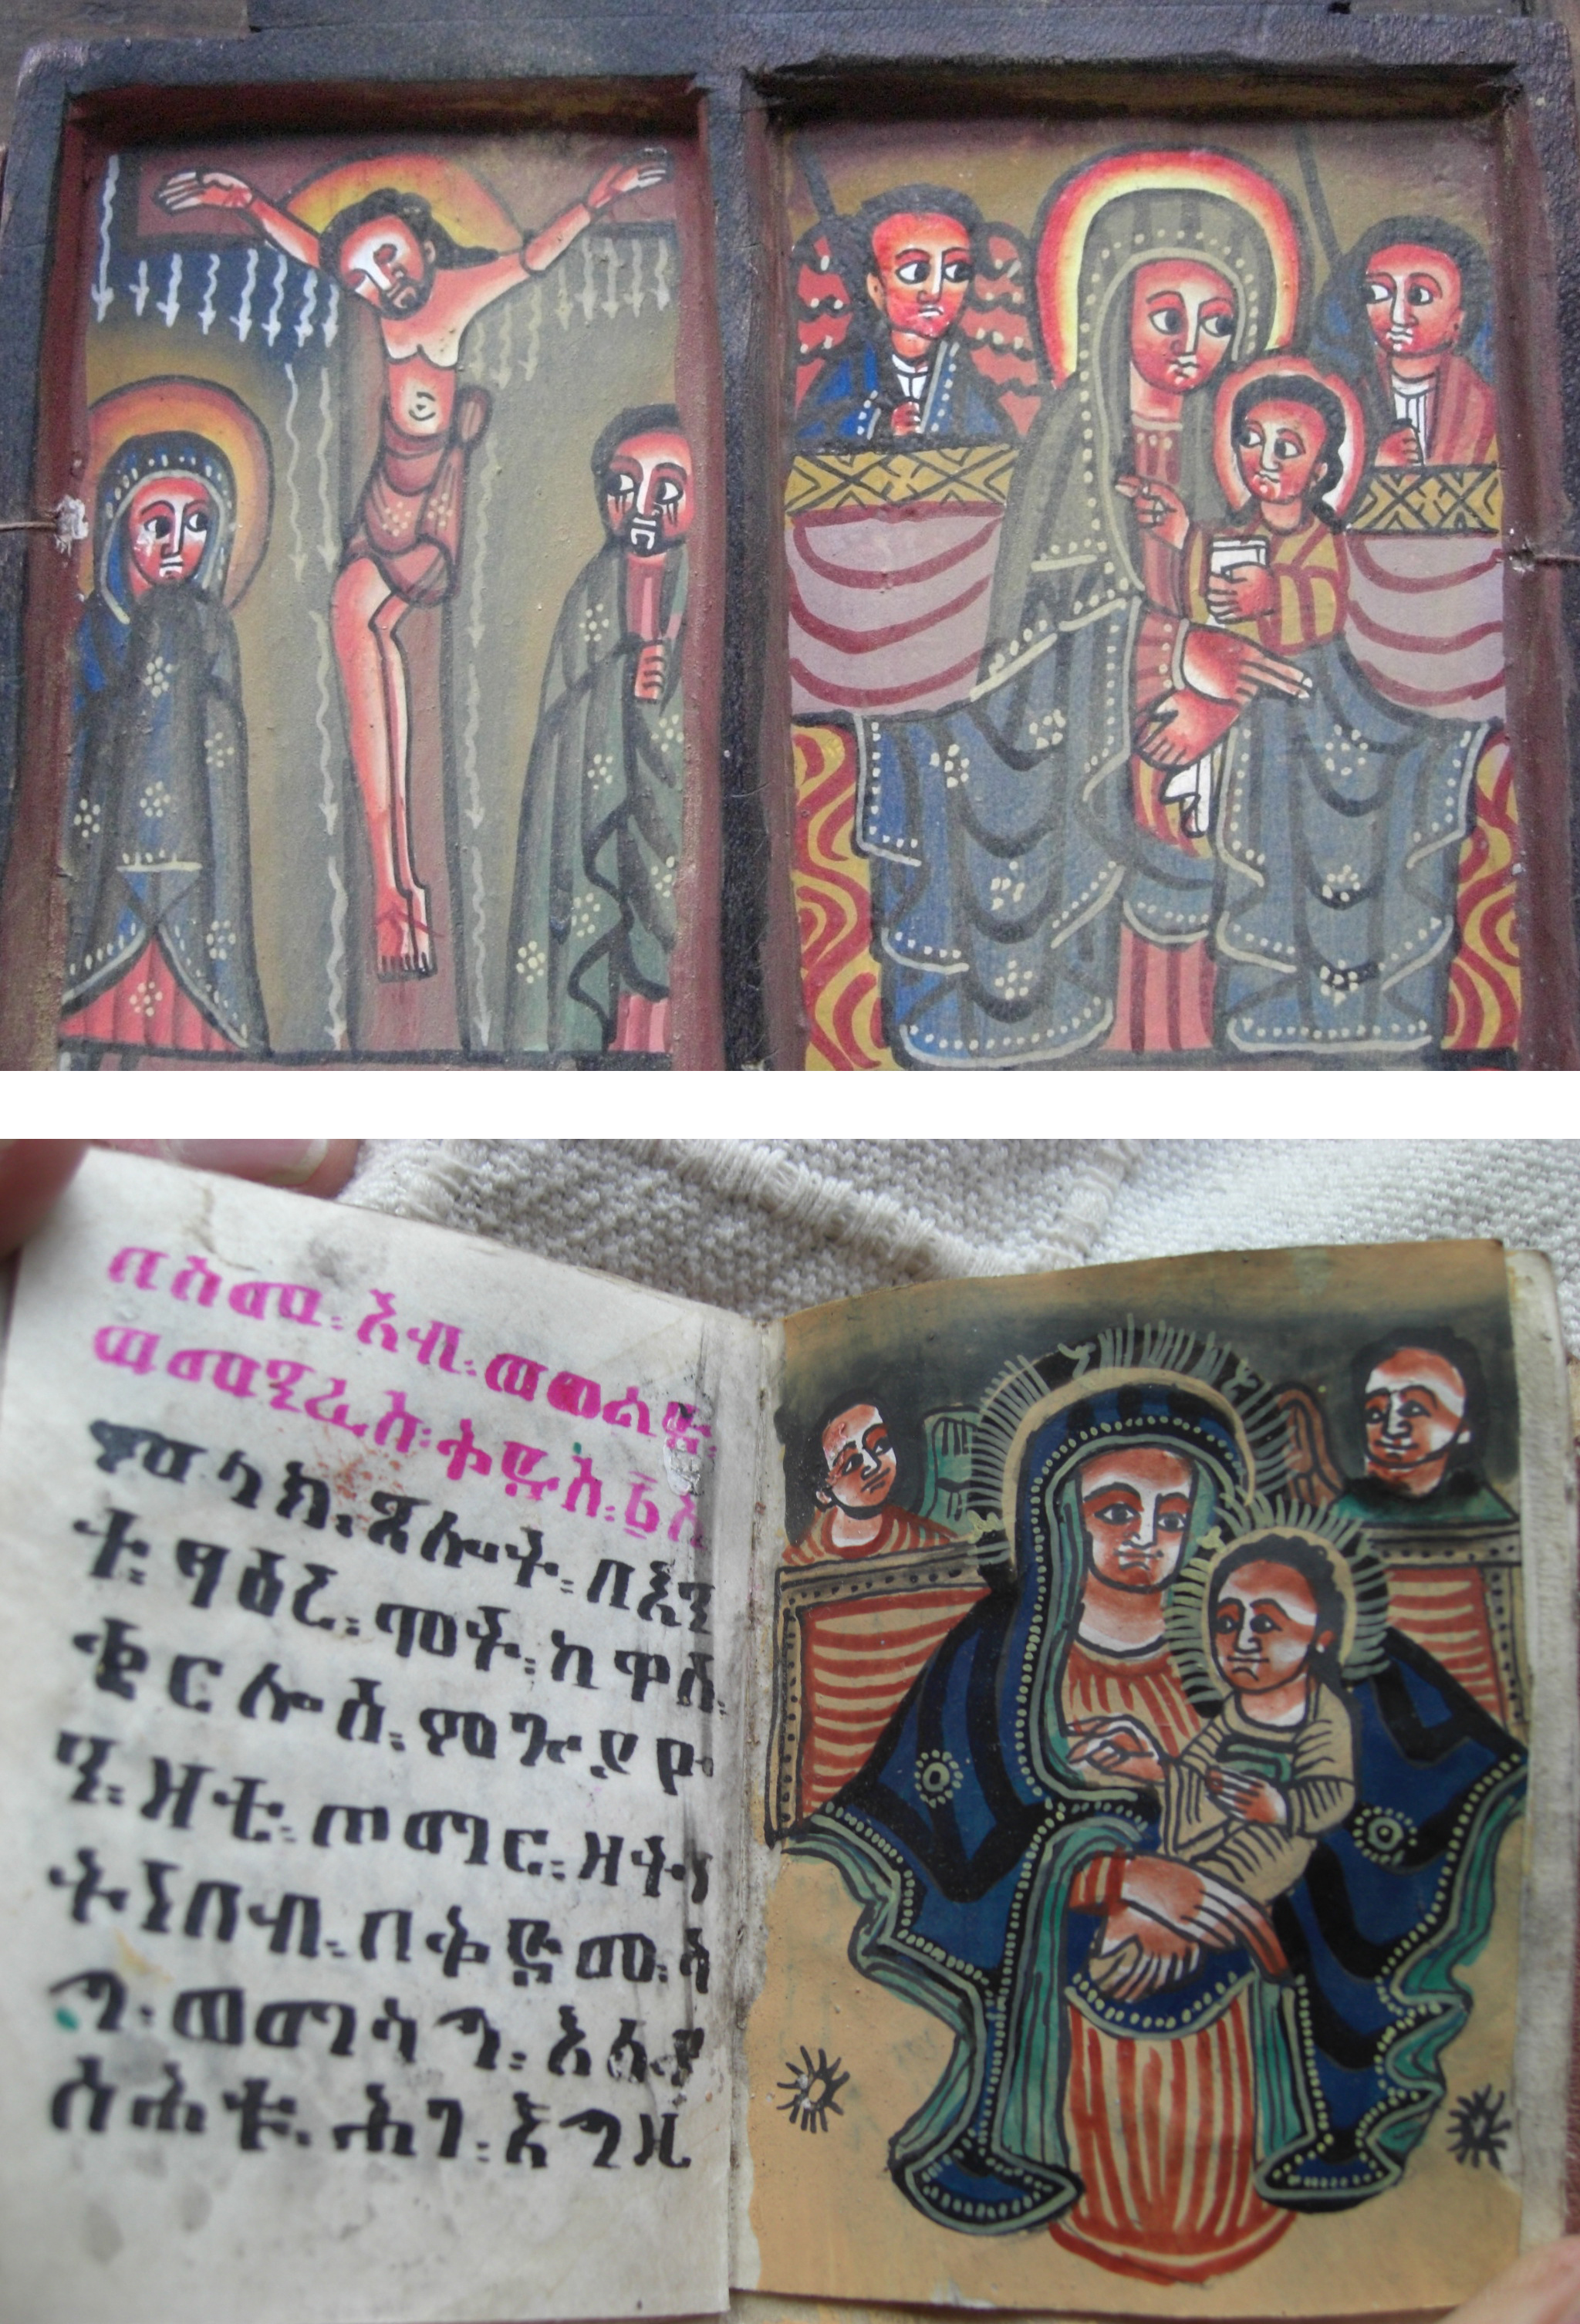 A modern religious icon (above) and modern manuscript (below) from Ethiopia. Photographs by Maia Sheridan, January 2013.